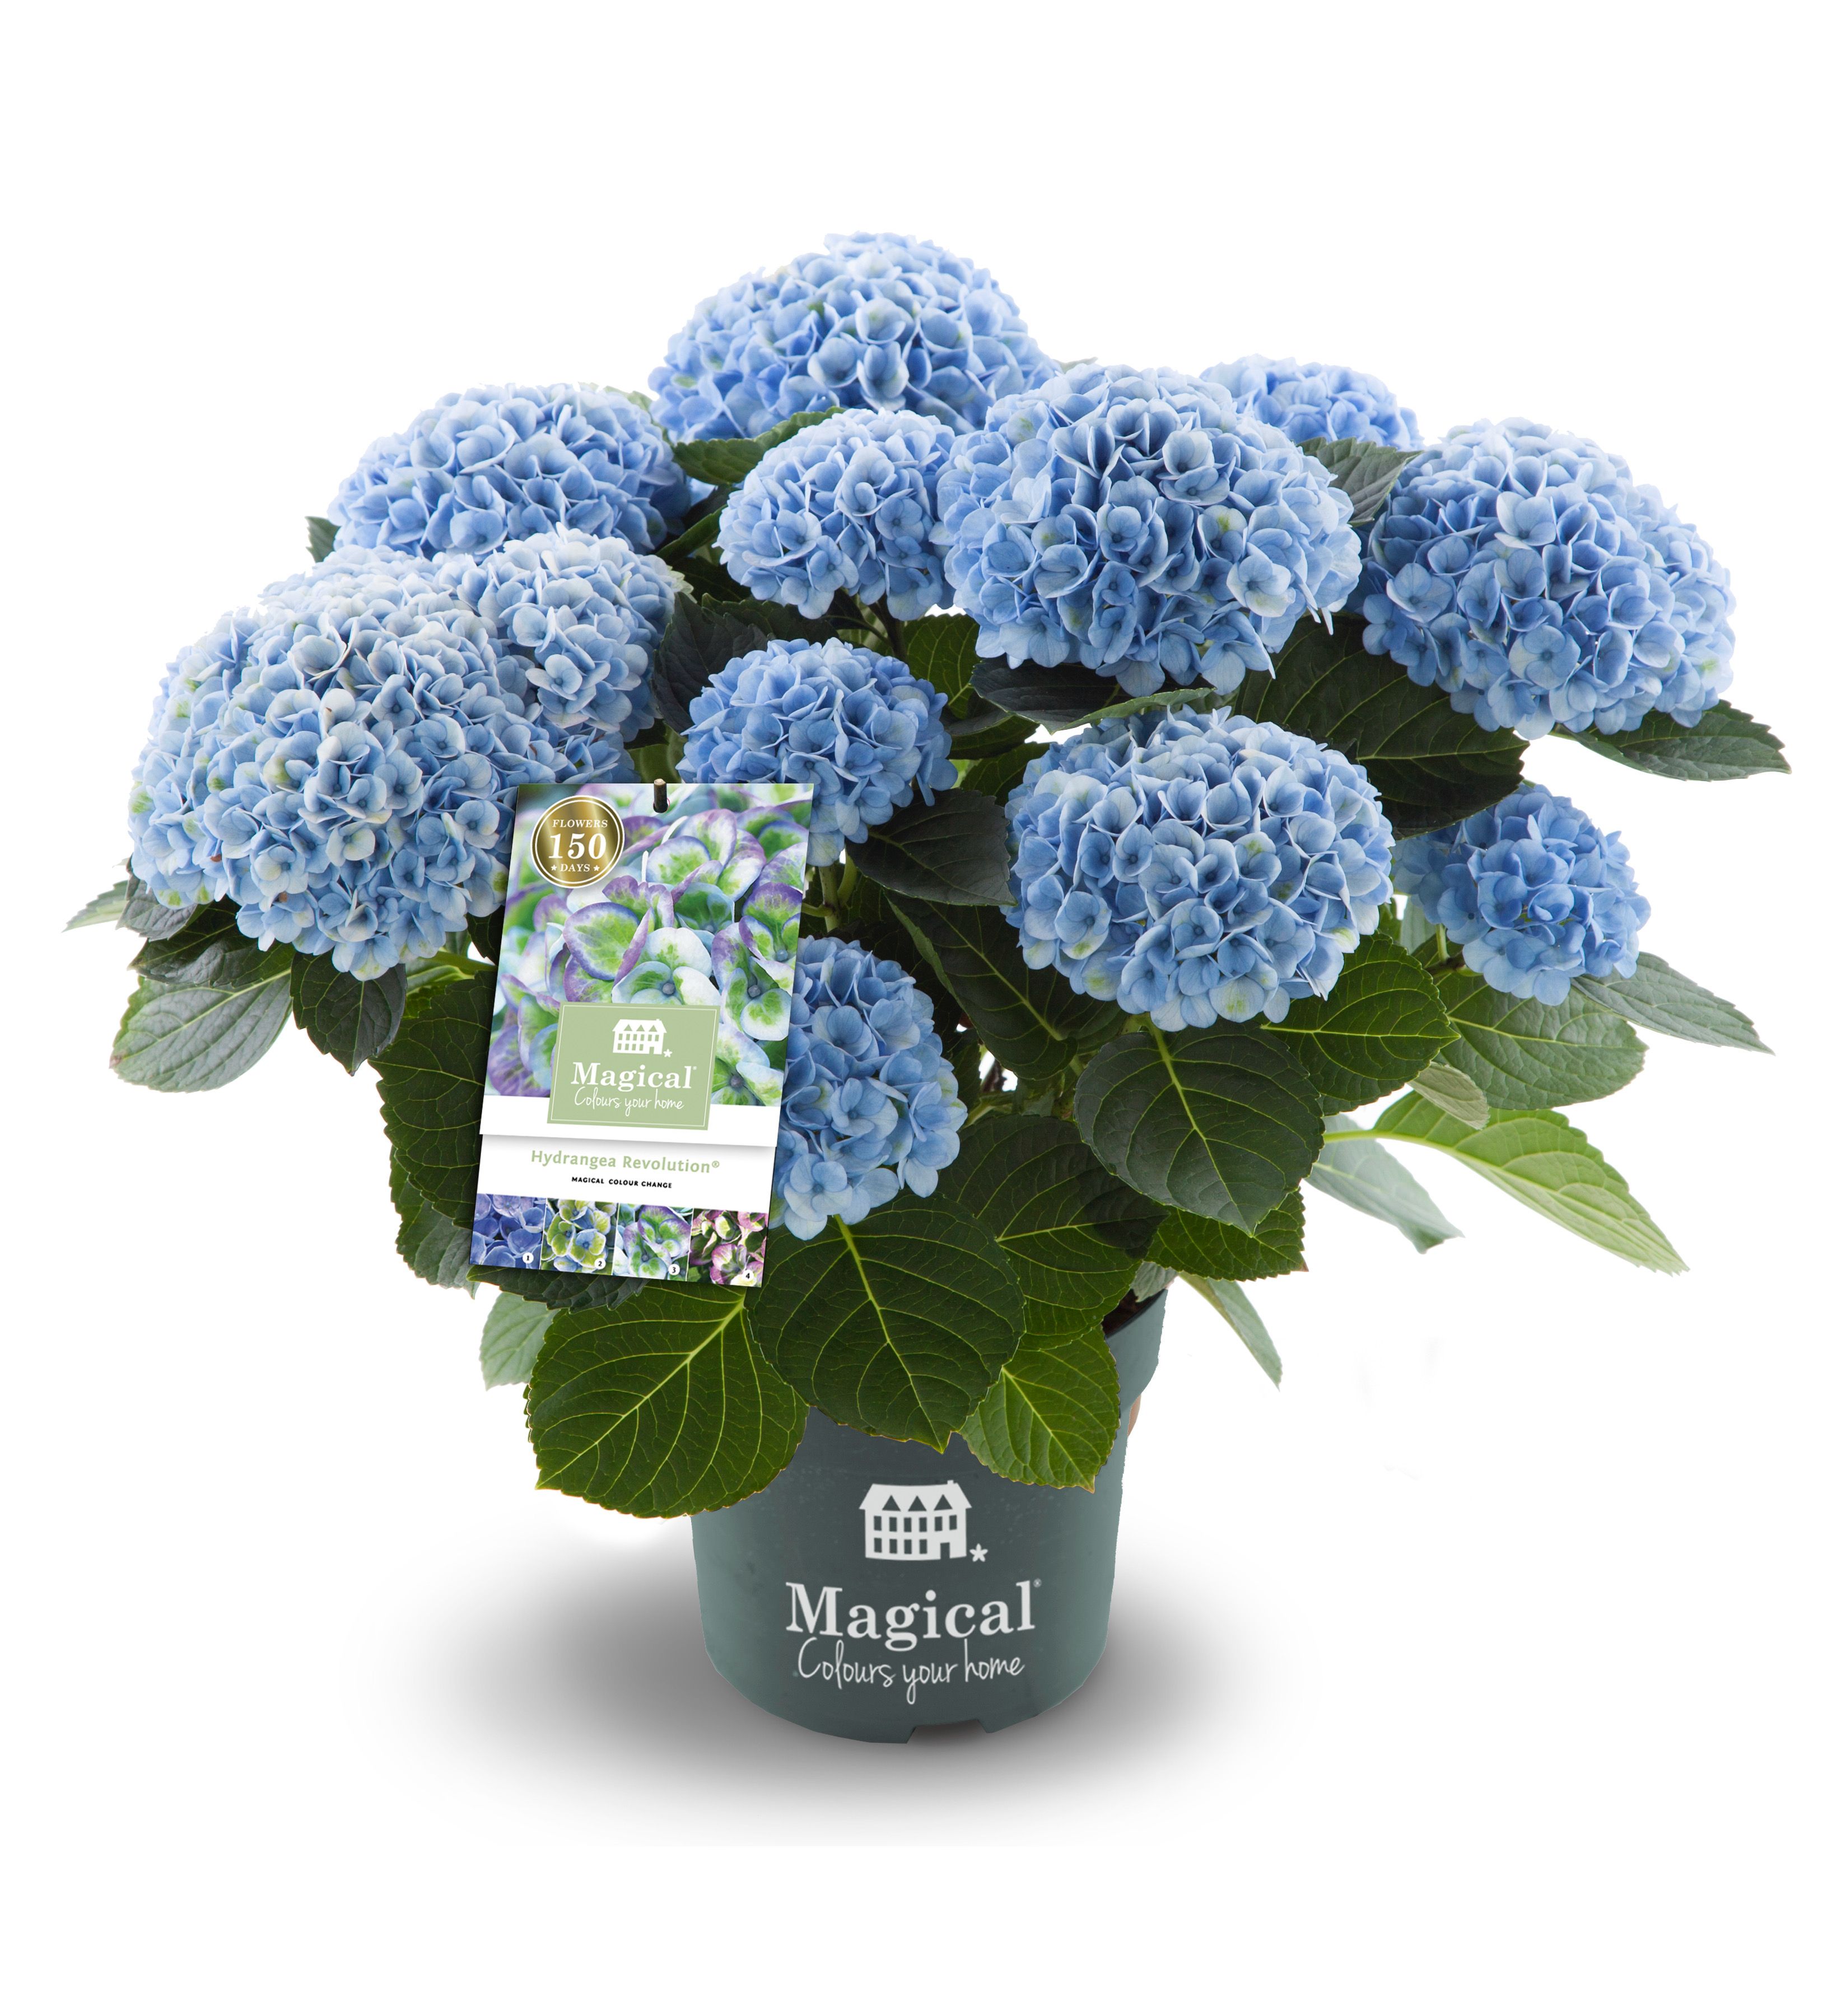 images/plants/hydrangea/hyd-magical-everlasting-revolution/hyd-magical-everlasting-revolution-0096.jpg